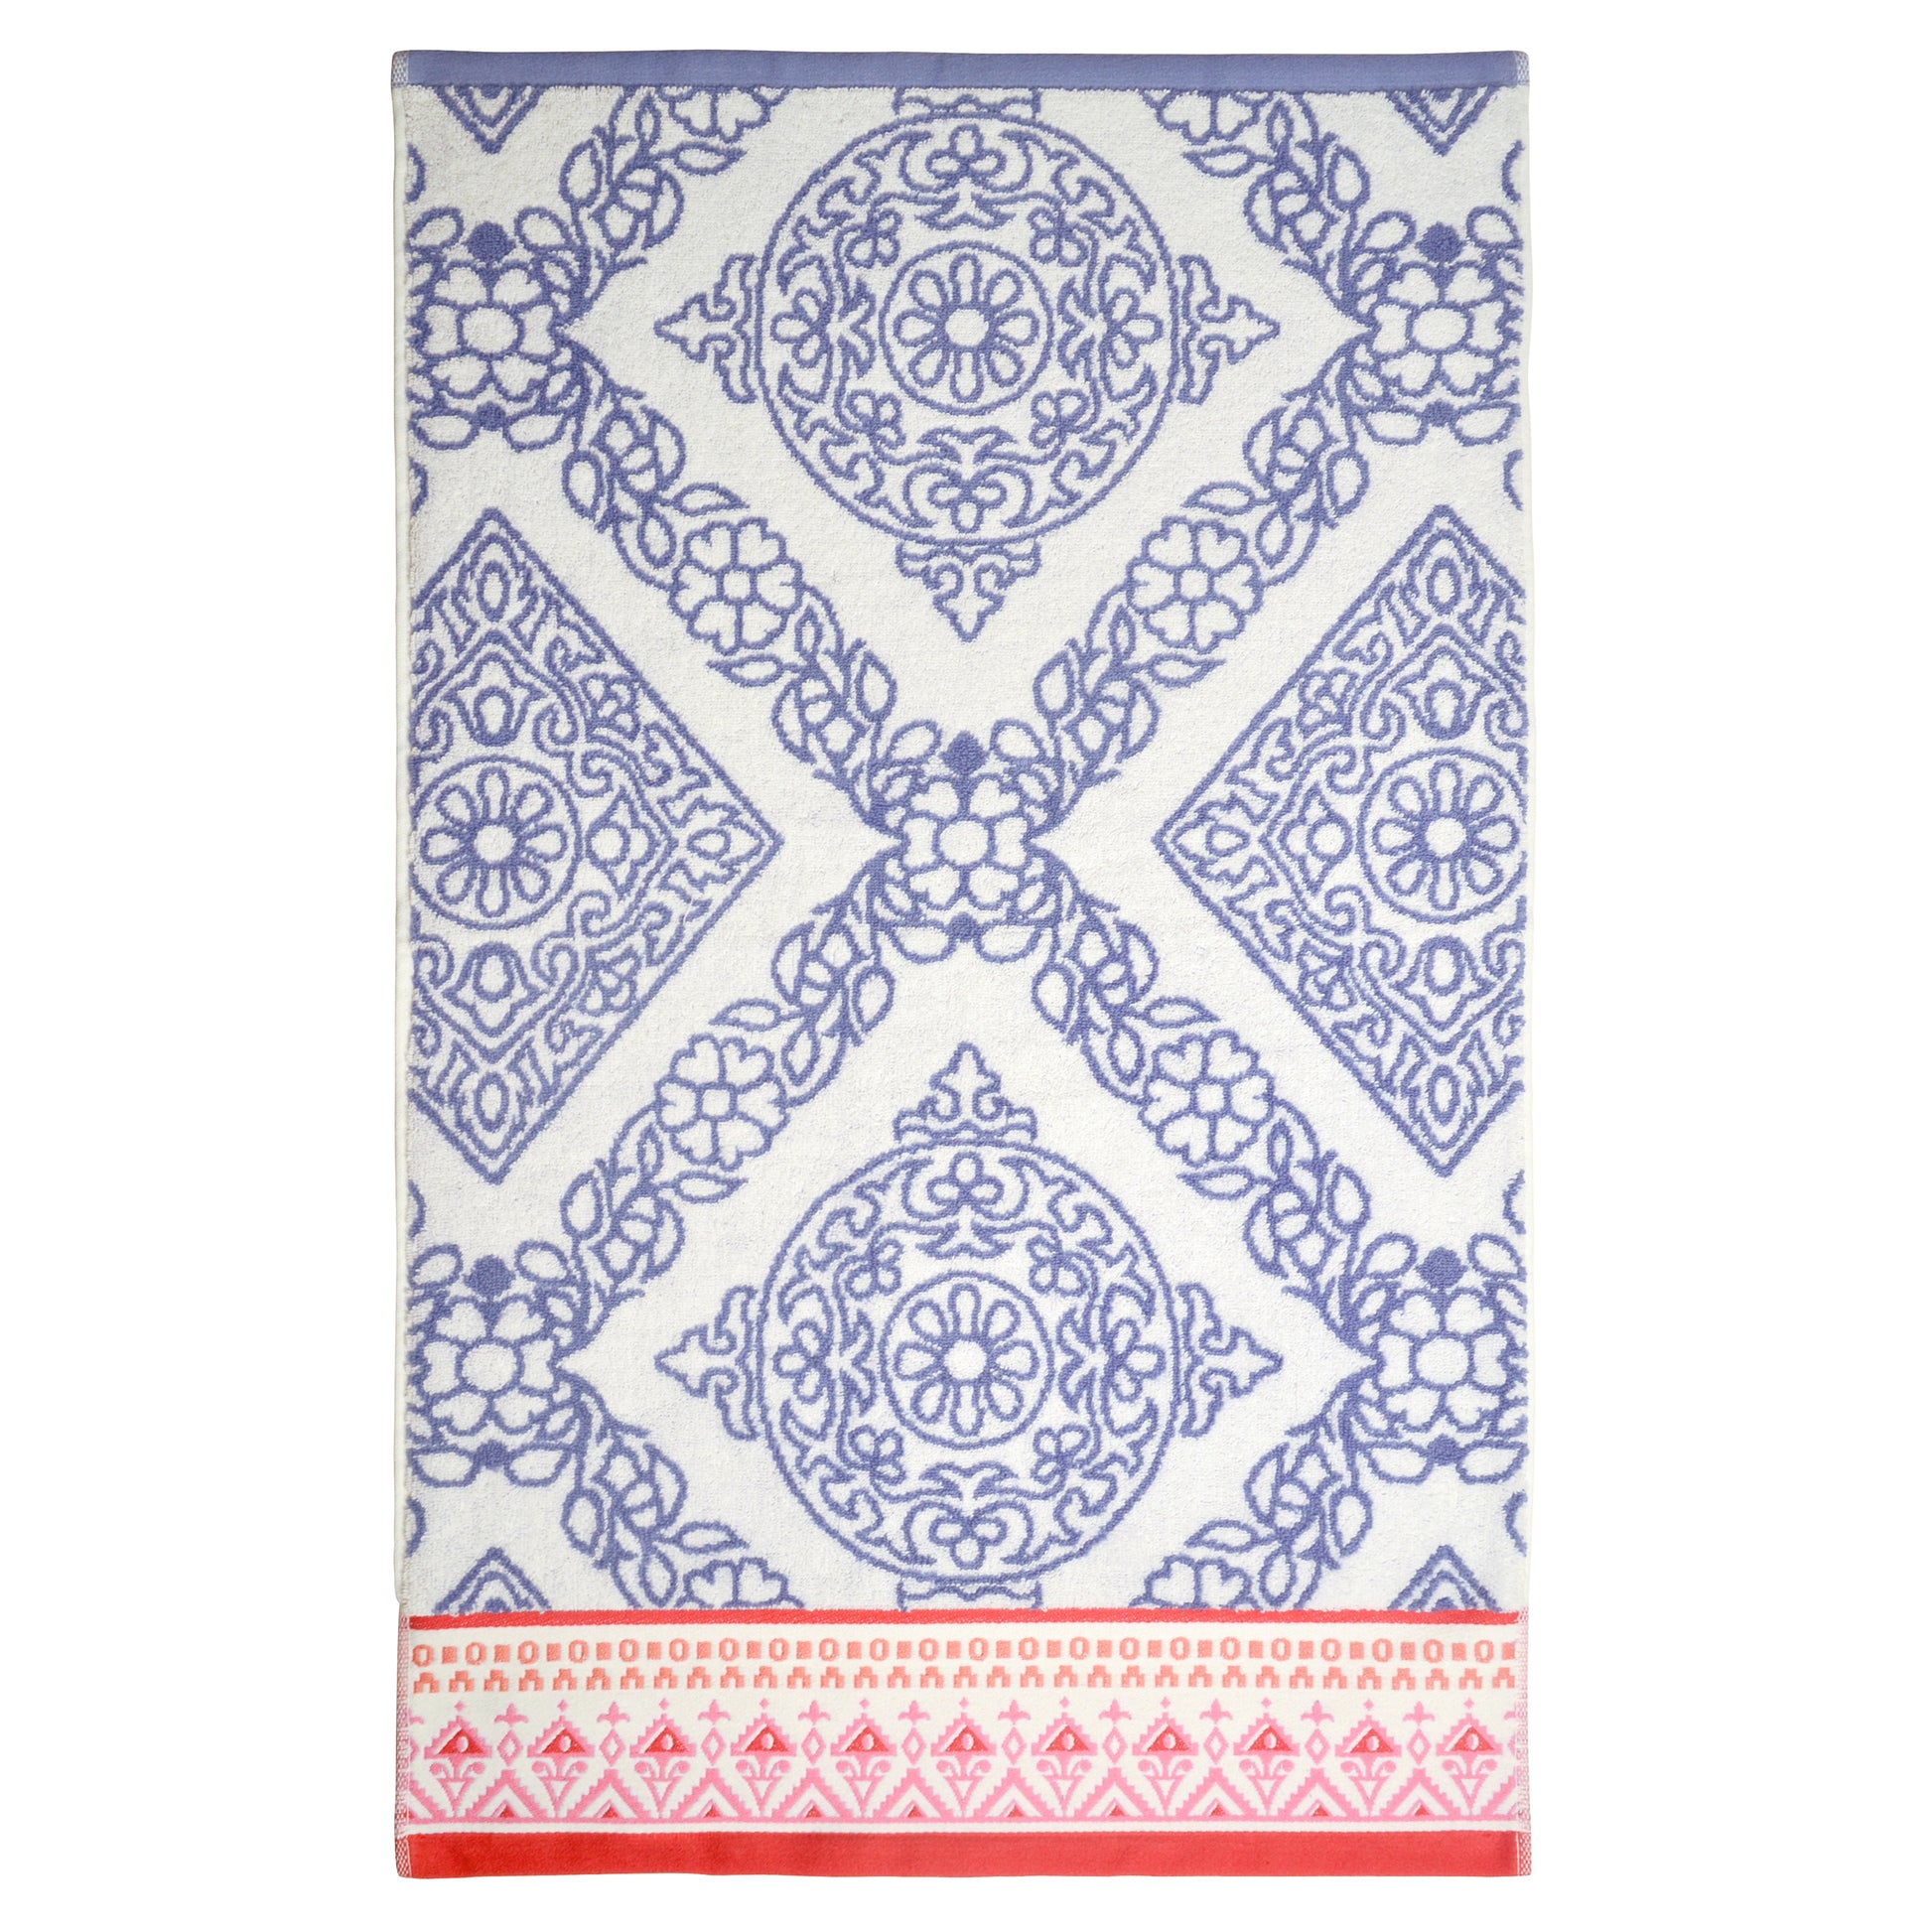 John Robshaw Mitta Periwinkle Hand Towel Collection